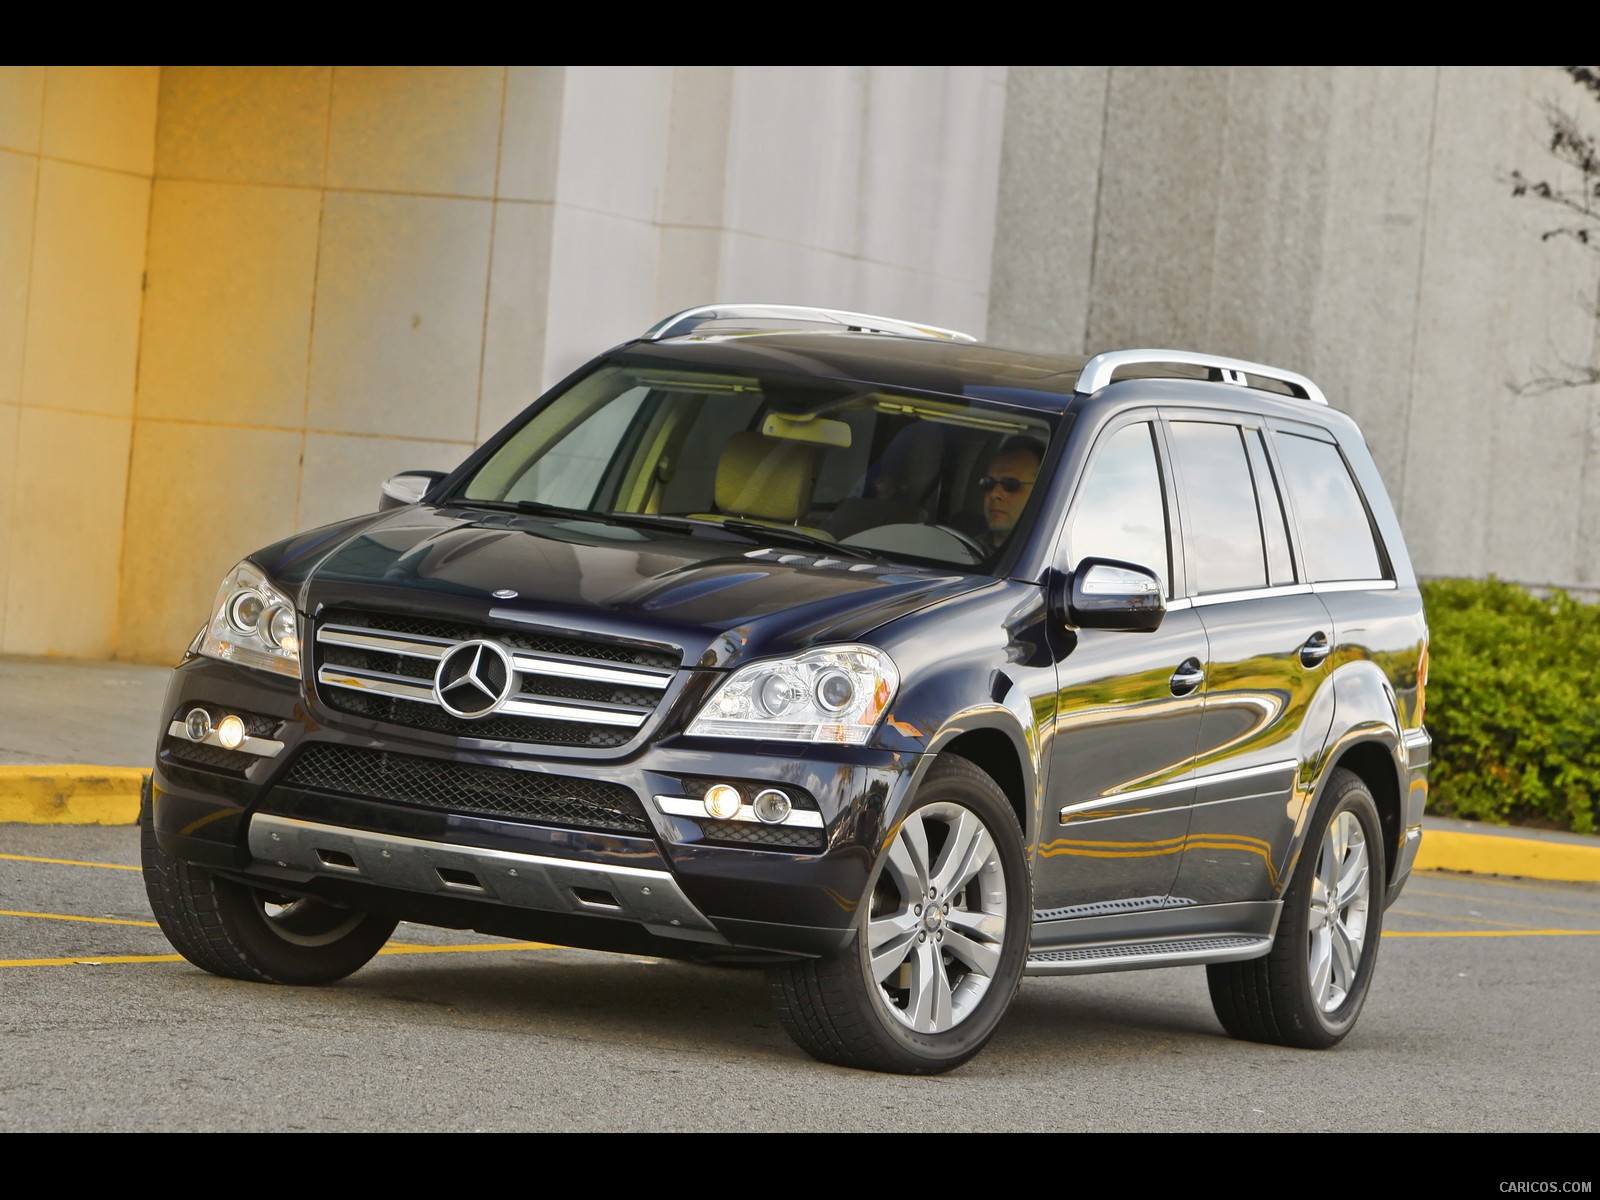 2010 Mercedes-Benz GL450 - Front, #86 of 112